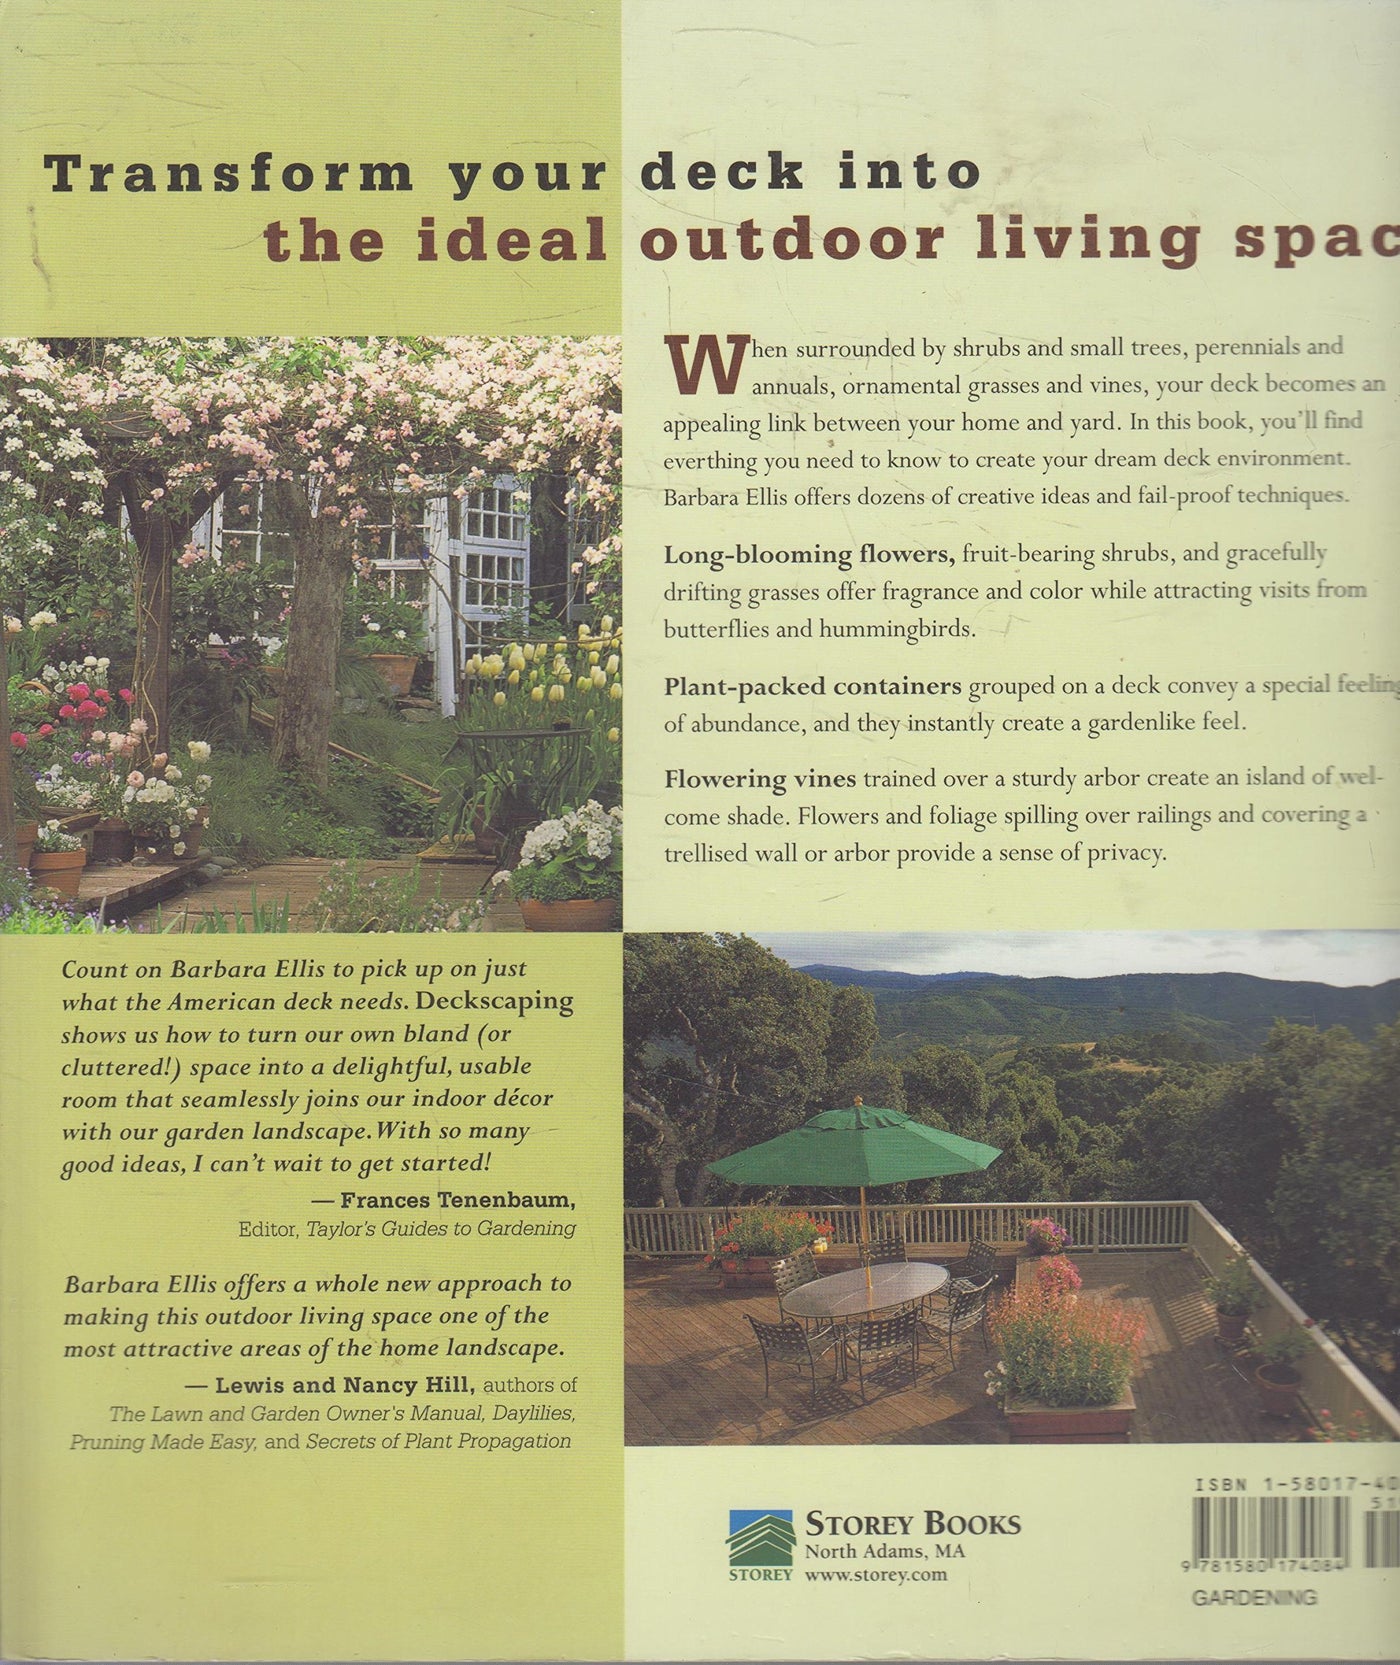 Deck Scaping: Gardening and Landscaping on and Around Your Deck